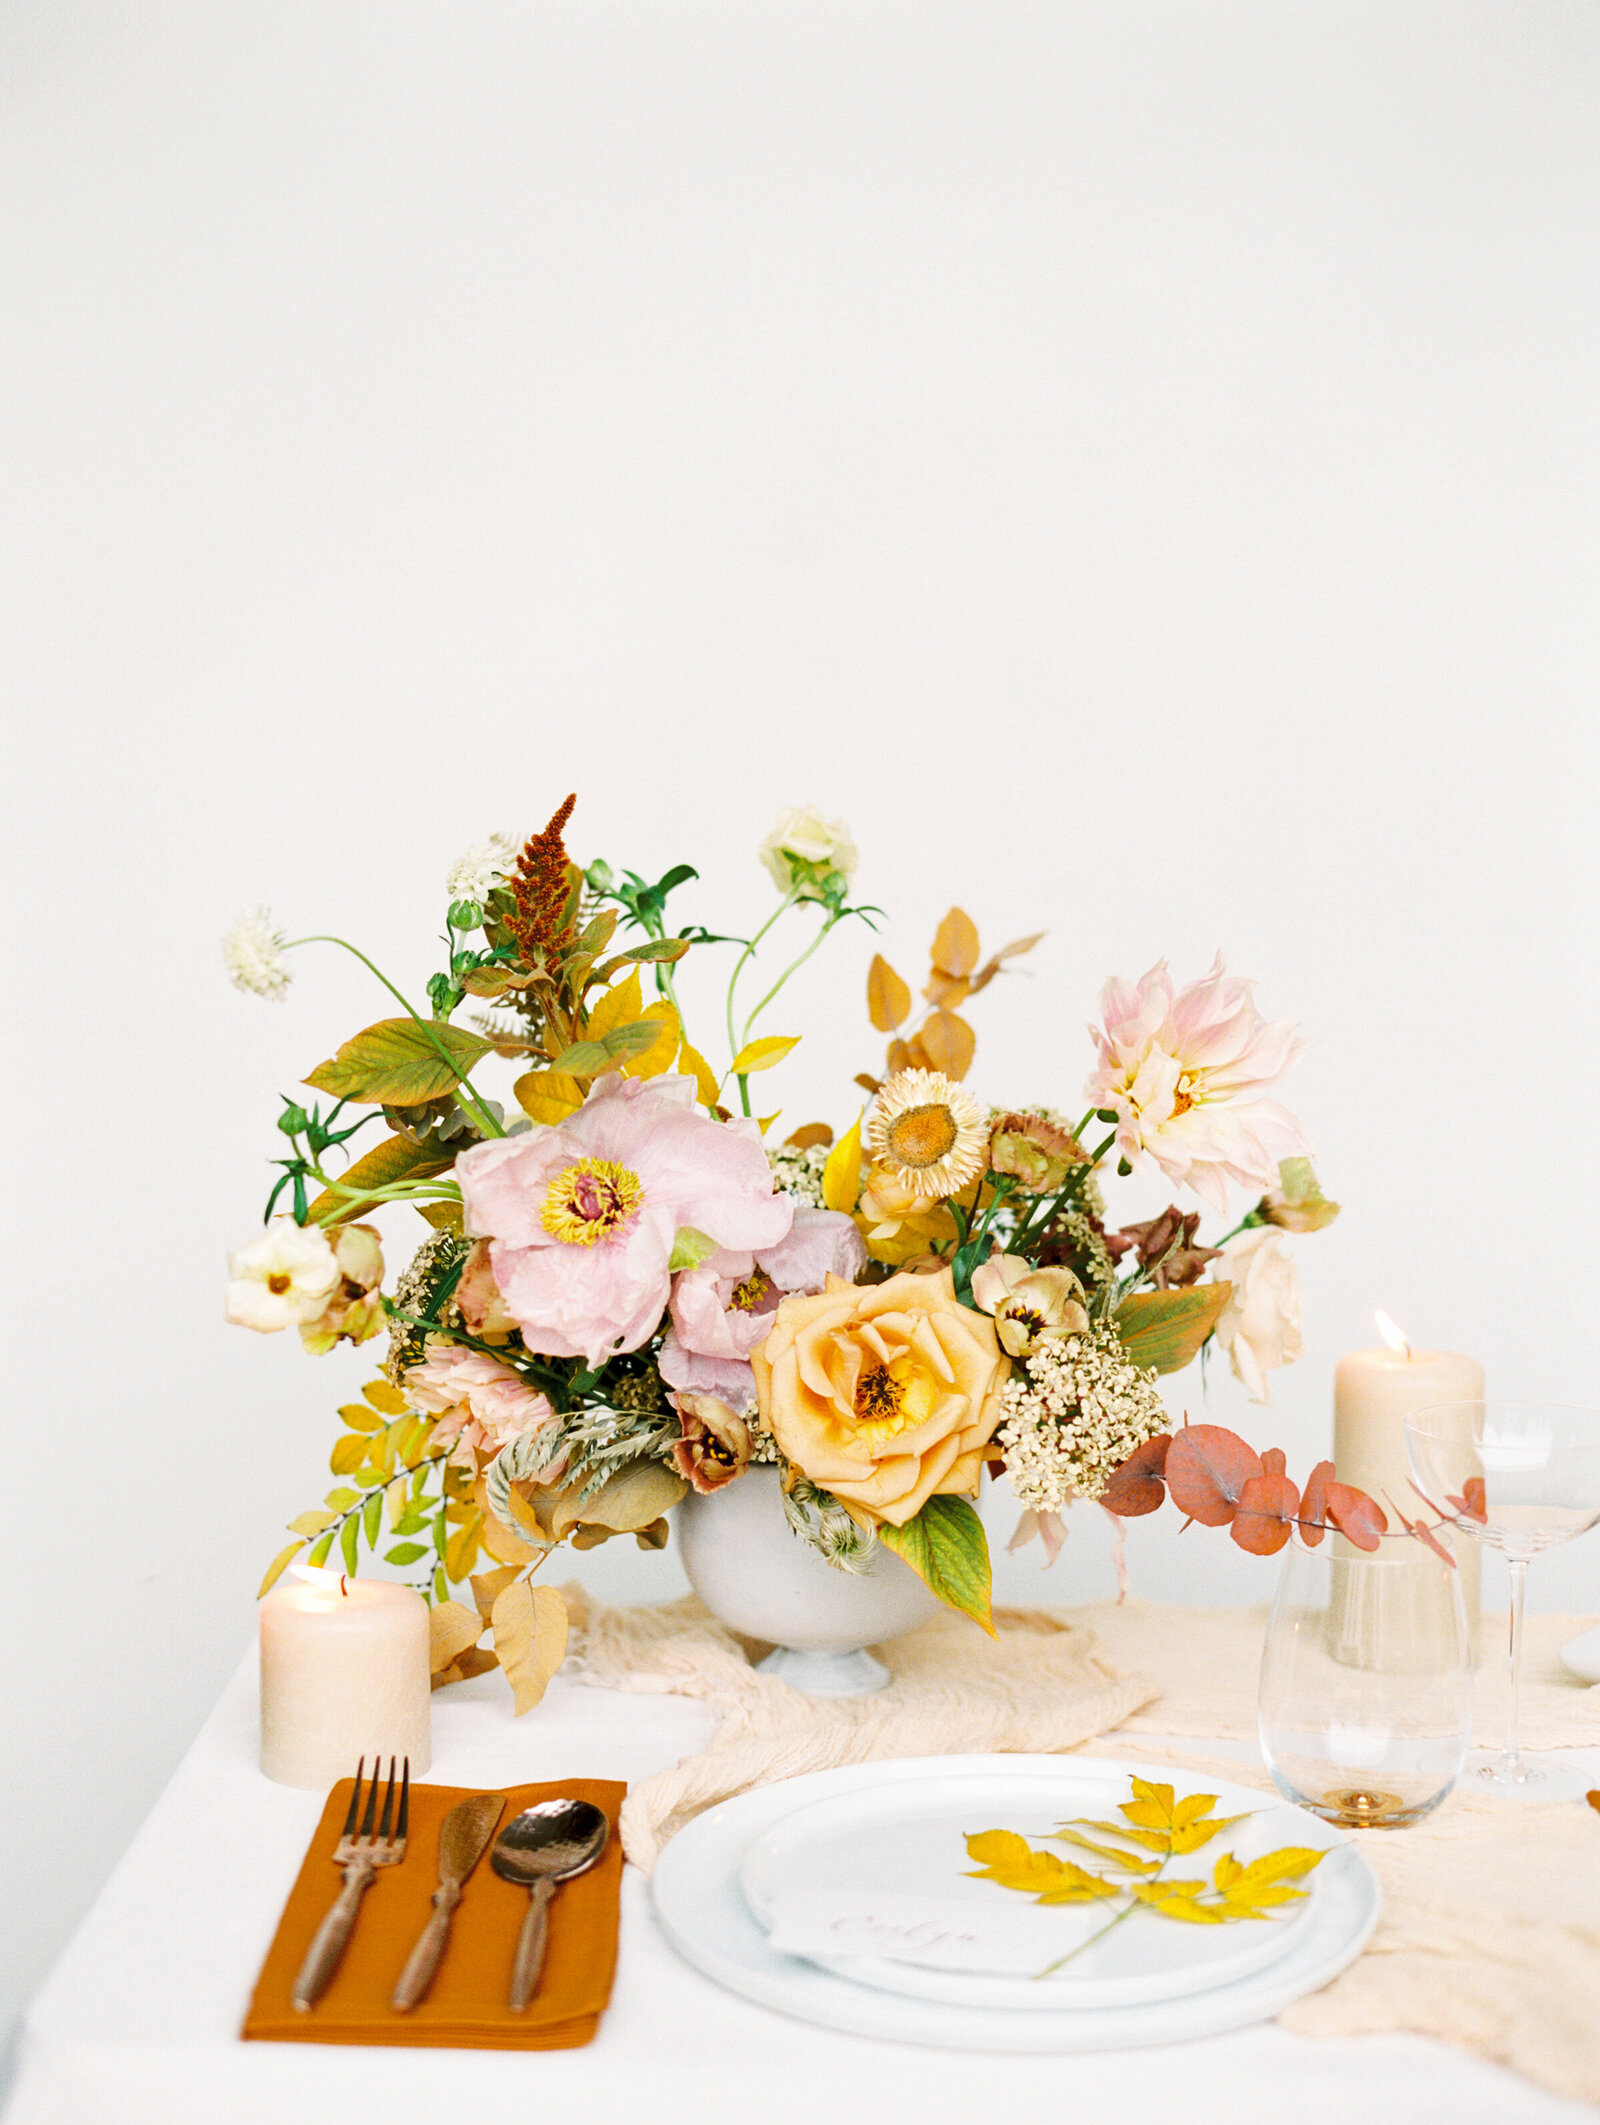 max-owens-design-at-home-floral-arrangements-21-intimate-table